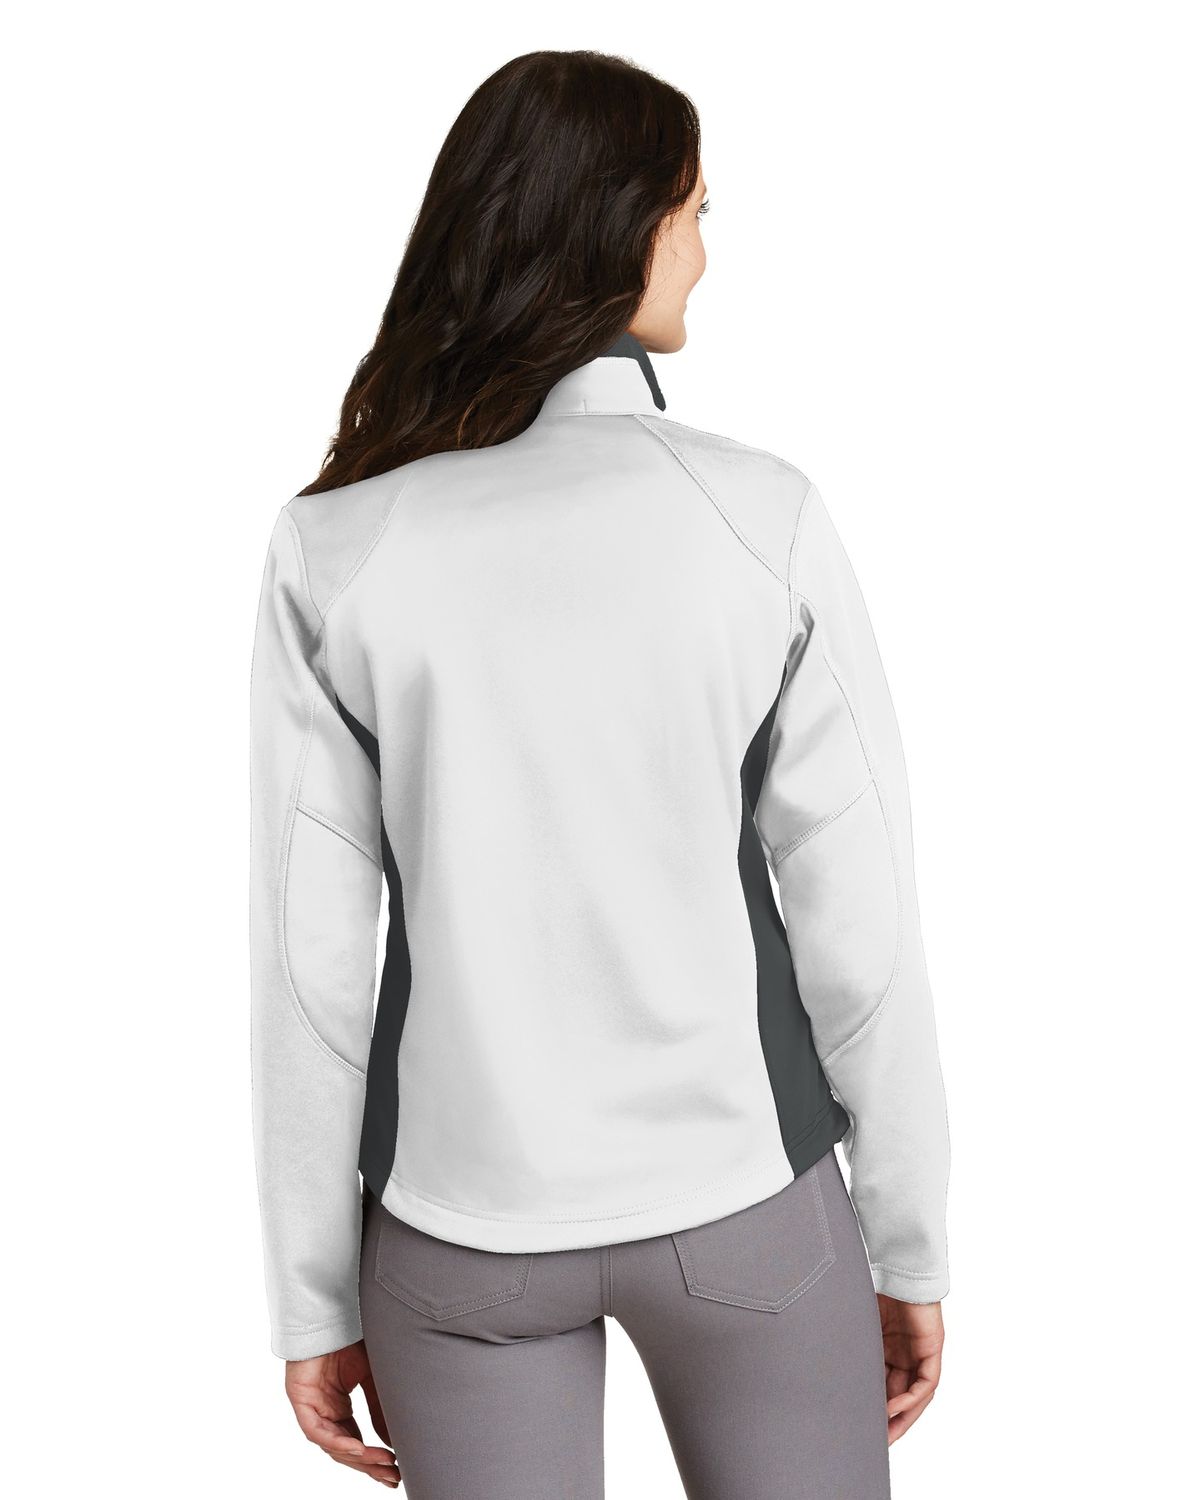 'Port Authority L794 Ladies Two-Tone Soft Shell Jacket'